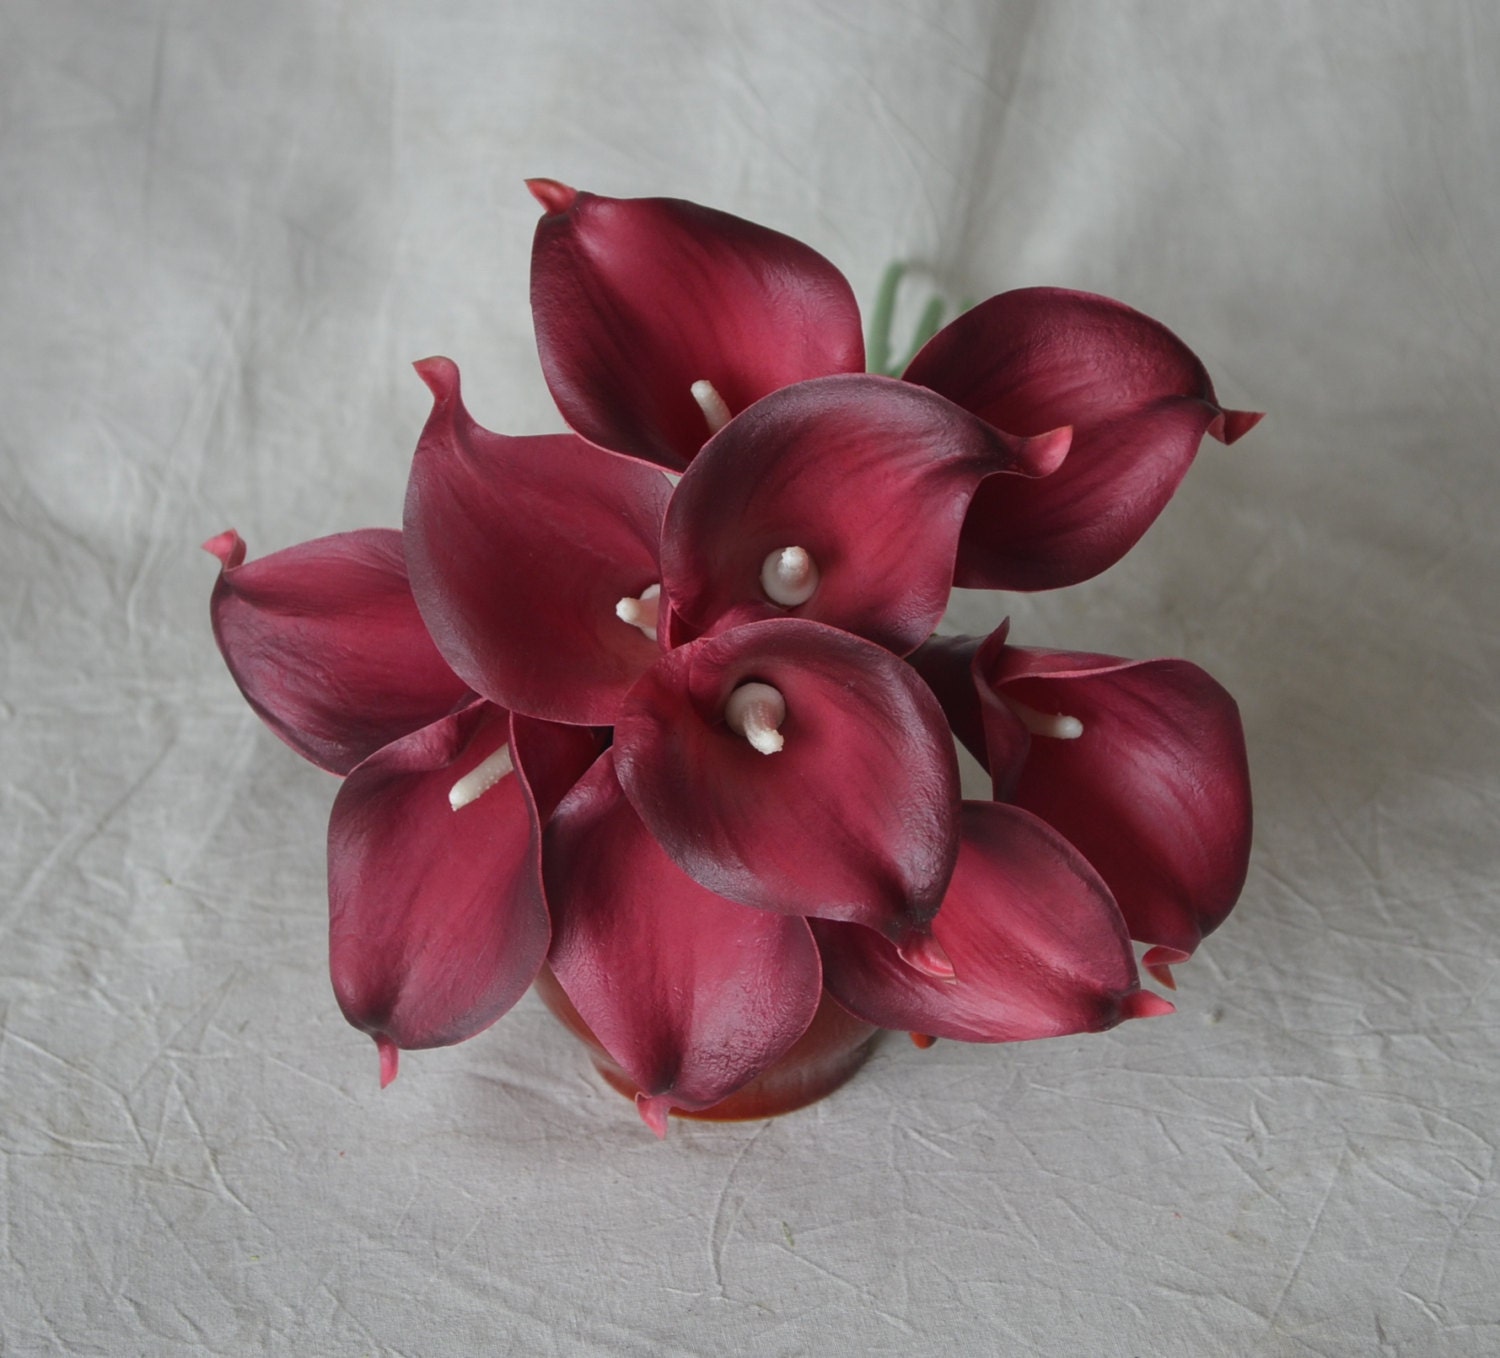 Details about   9 Dark Purplish Burgundy Calla Lilies Real Touch Flowers For Wedding Bouquets 